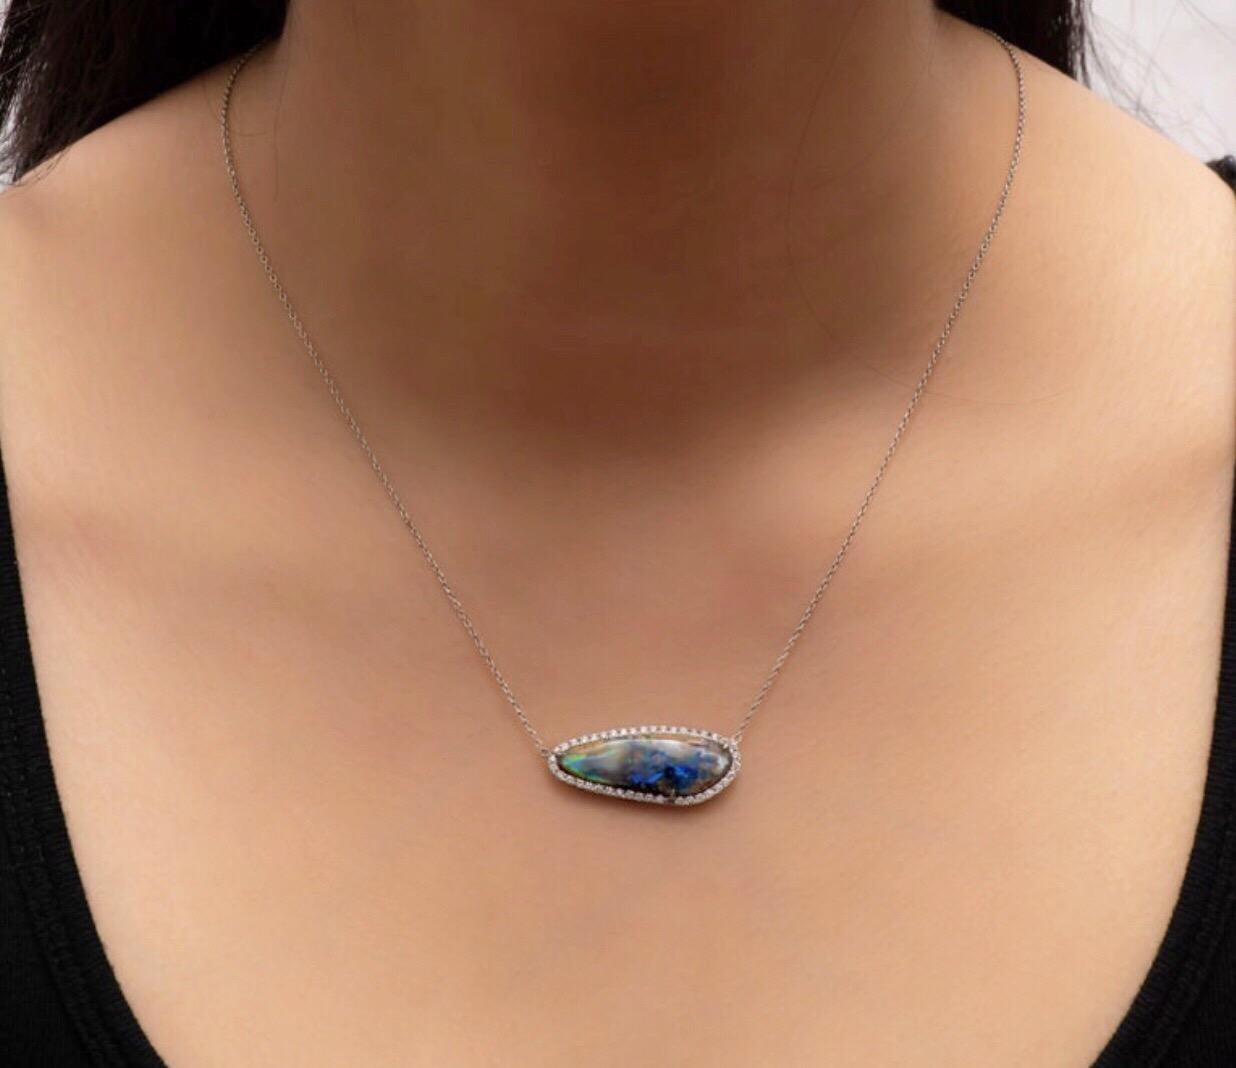 Natural boulder opal set in a halo of 0.42 carats total in fine round brilliant cut diamonds set in a 14K white gold pendant that is attached to a 18